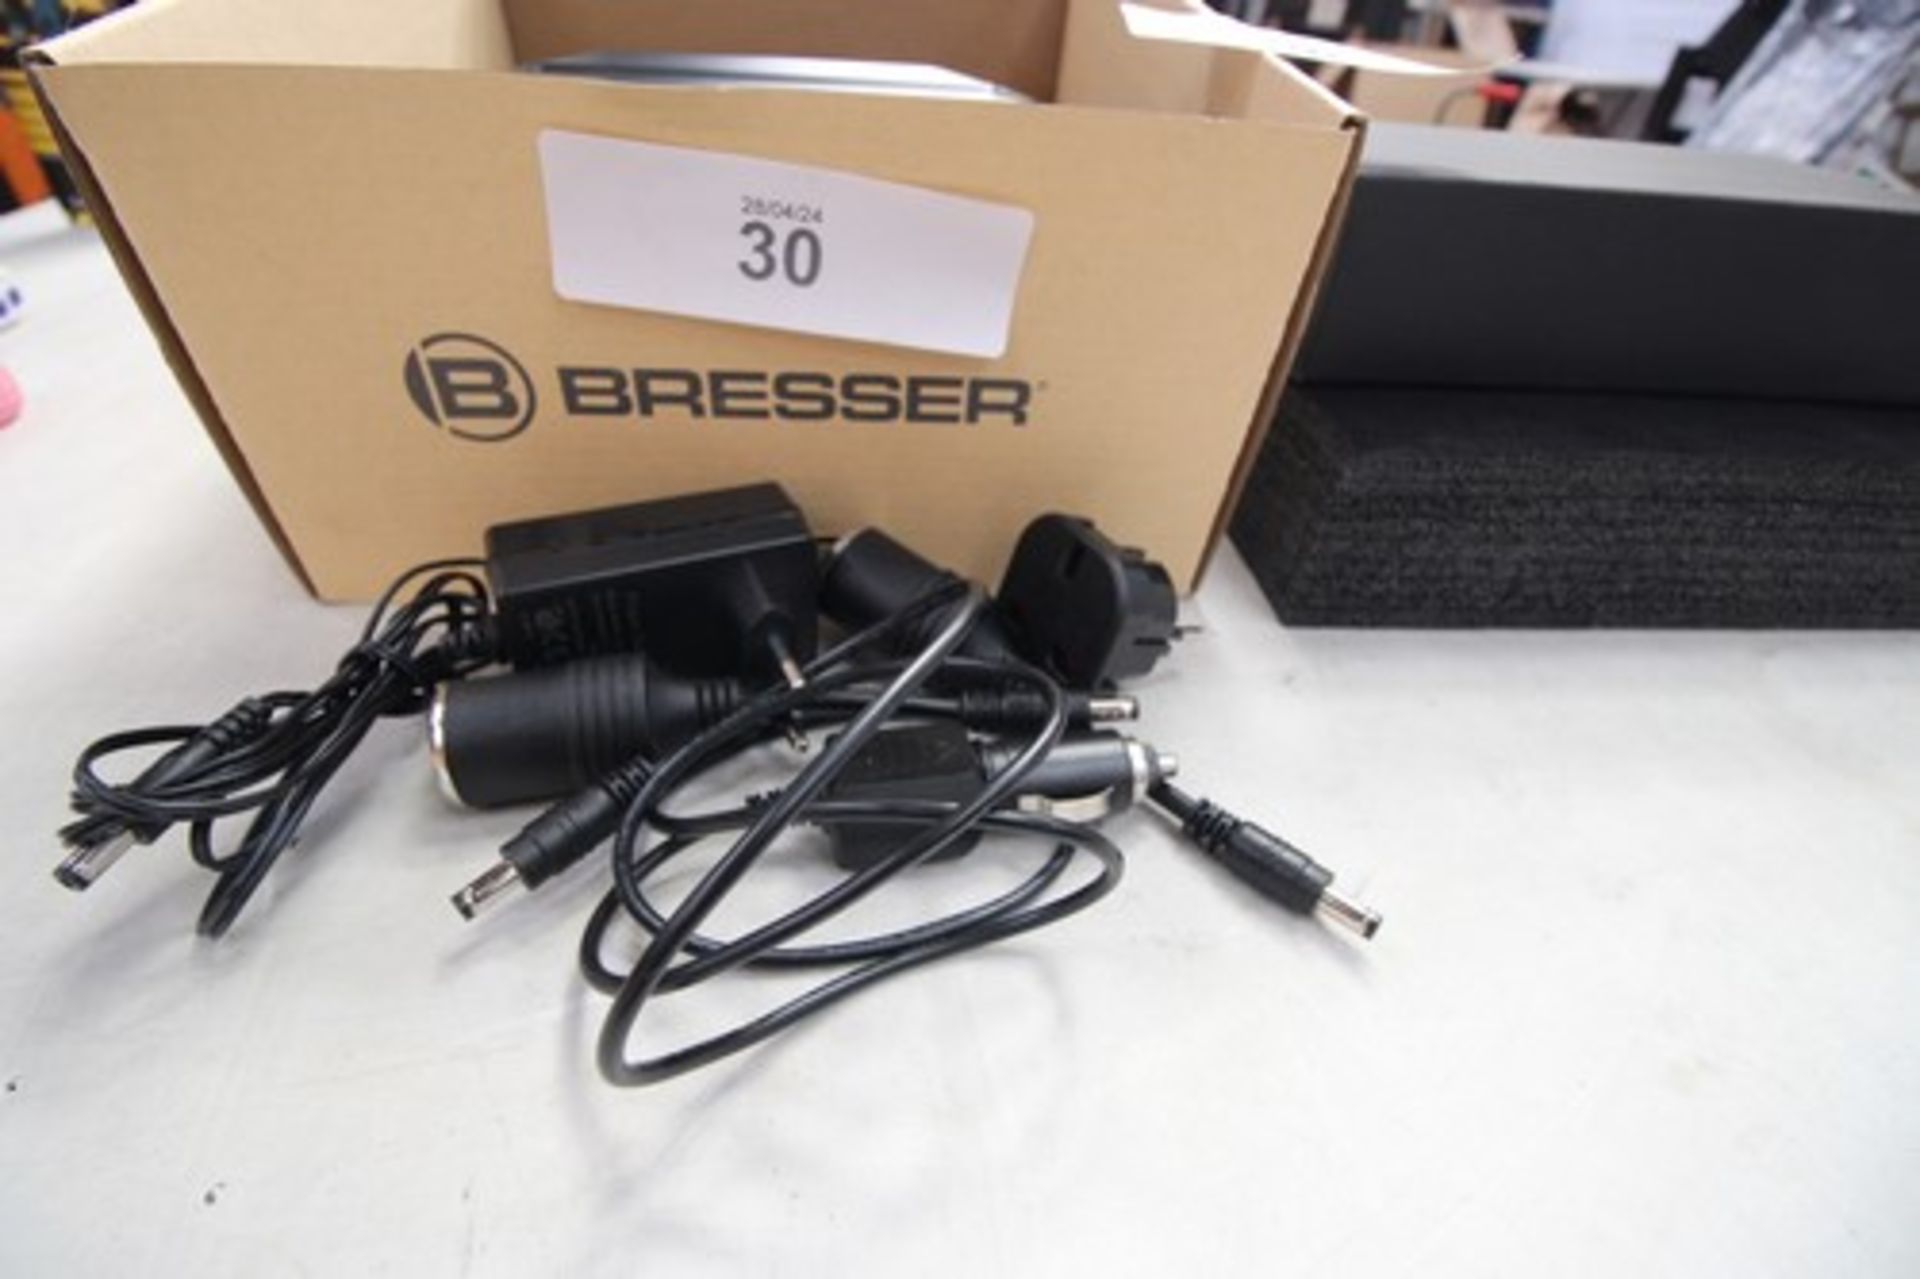 1 x refurbished Bresser 100 watt portable power supply, powers on ok, not fully tested - second-hand - Image 2 of 3